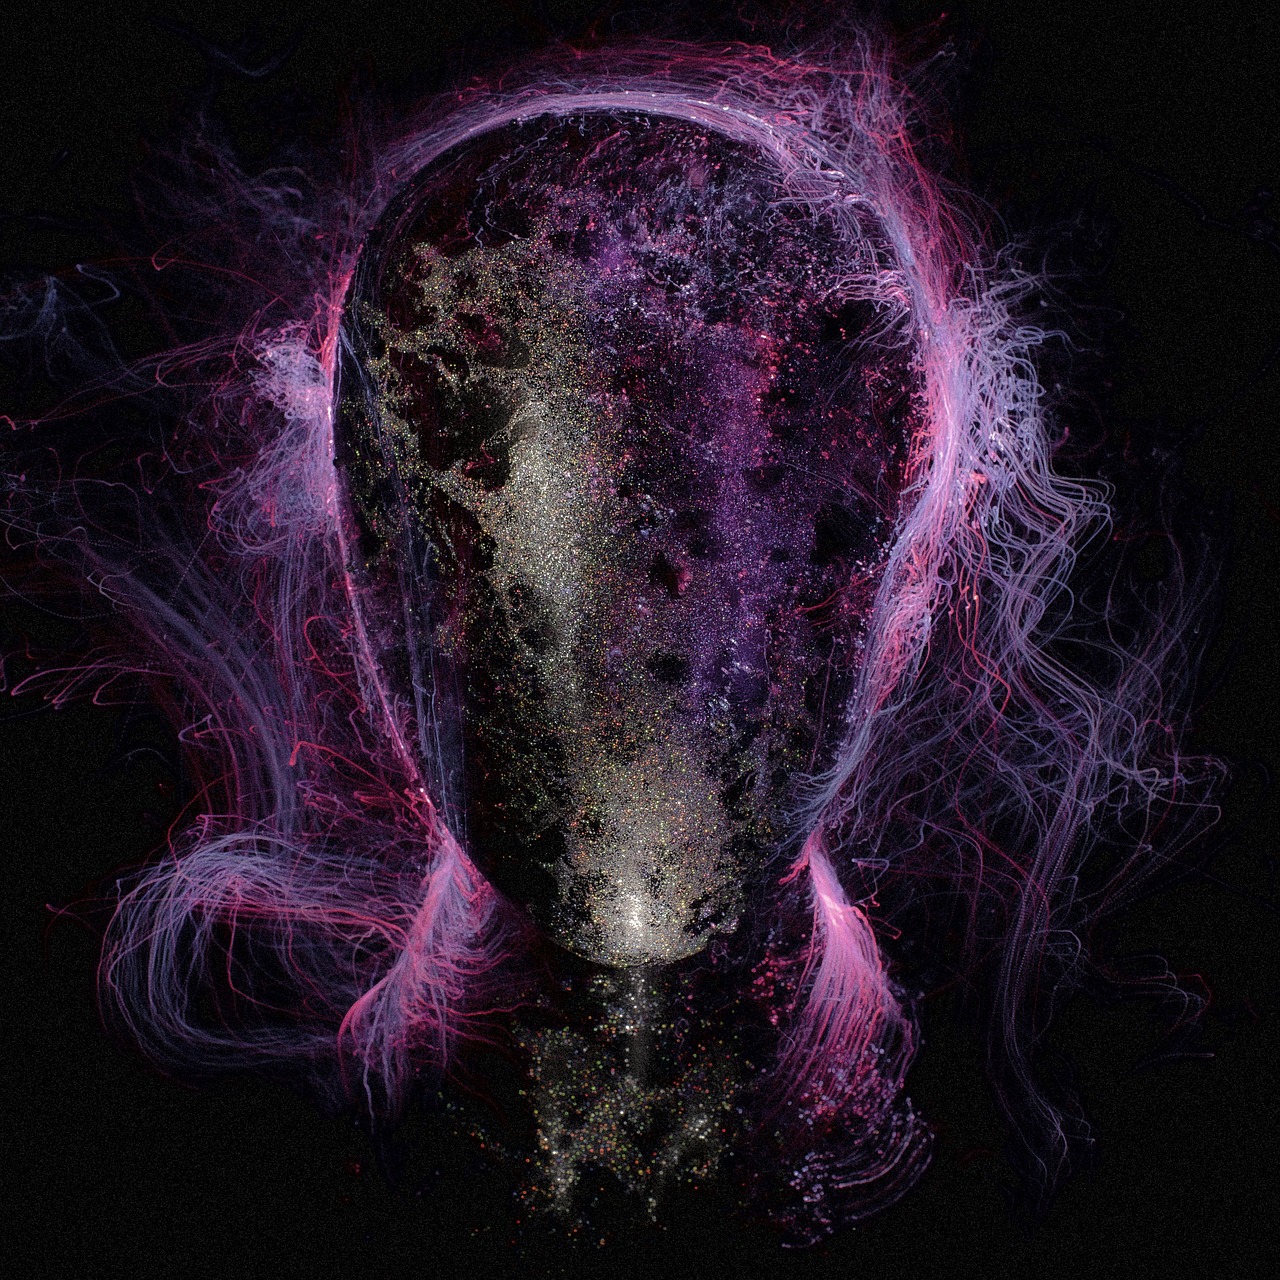 a close up of a person's head with smoke coming out of it, digital art, by Anna Füssli, generative art, purple bioluminescence, intricate broken space helmet, tentacles in universe, packshot